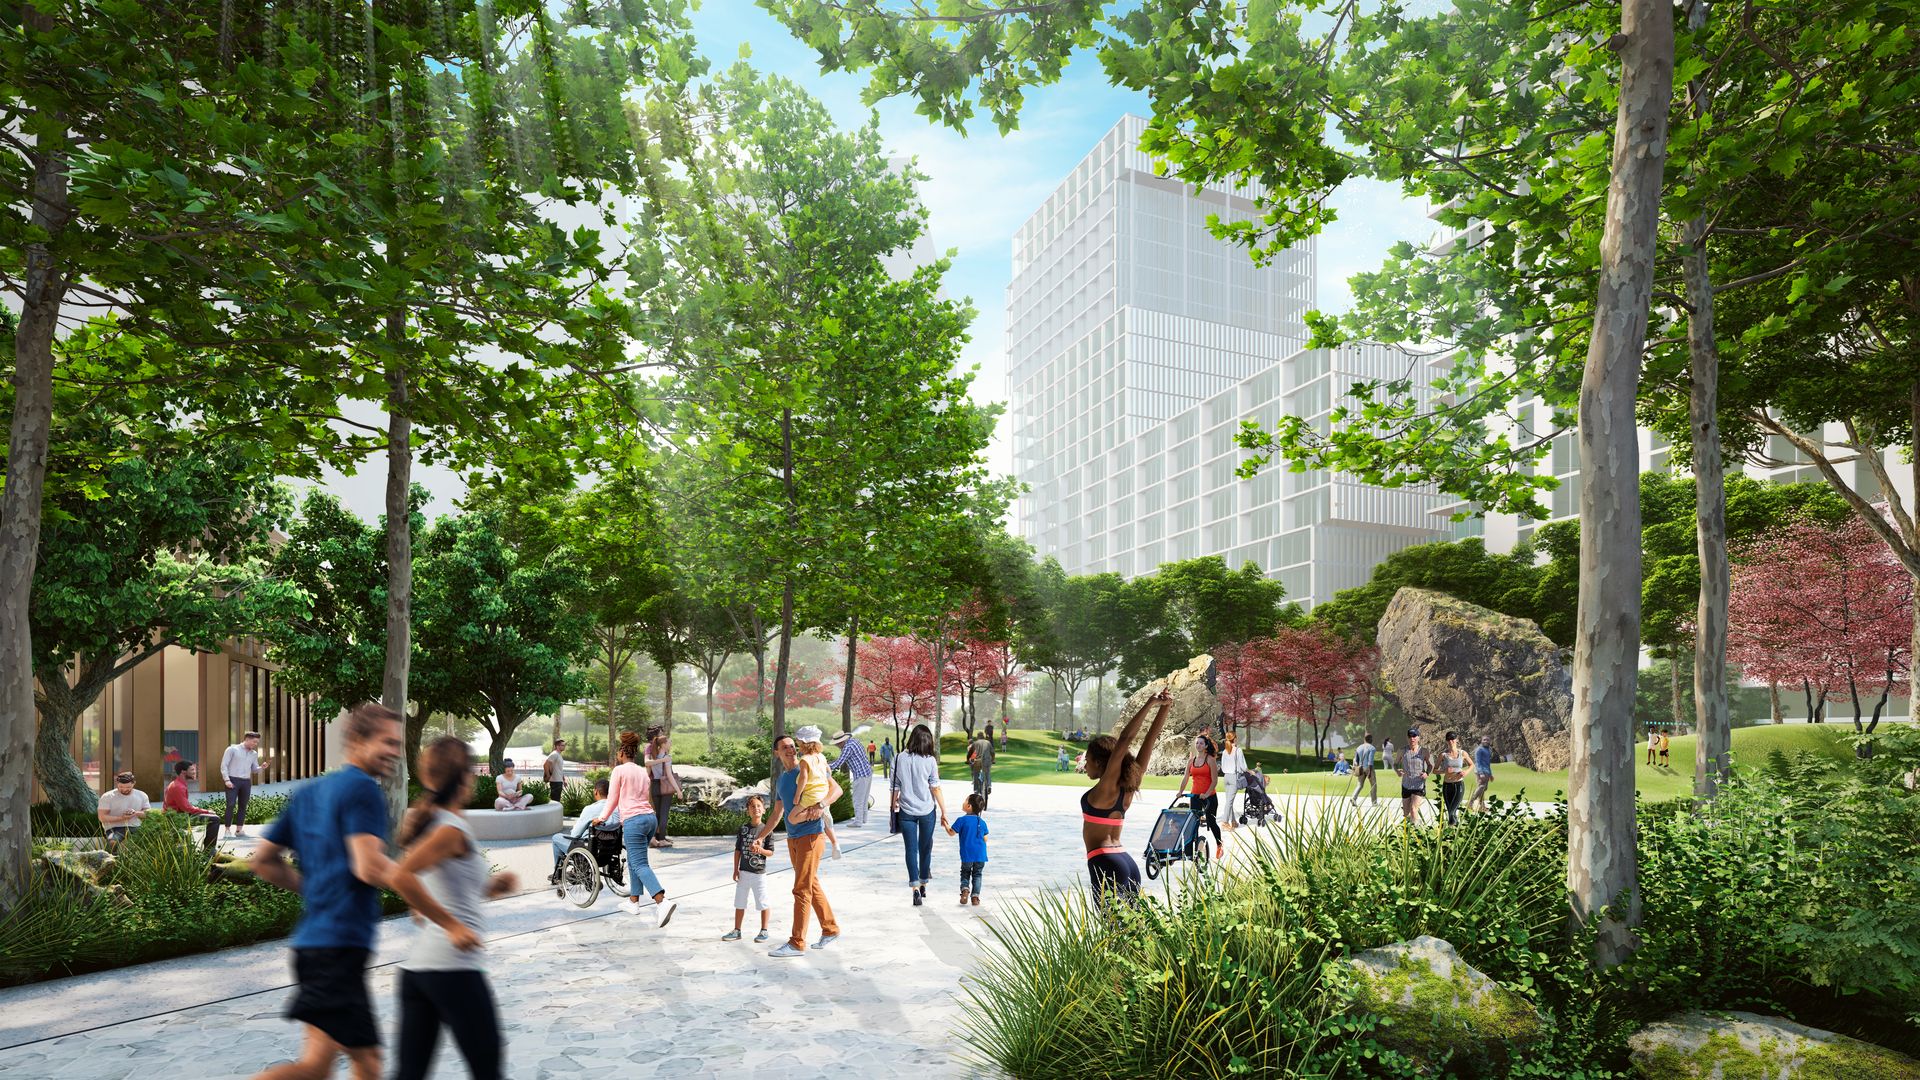 An artist's rendering of a redeveloped Lloyd Center, with pedestrian-friendly streets, green space and mixed-use buildings for high-rise housing.